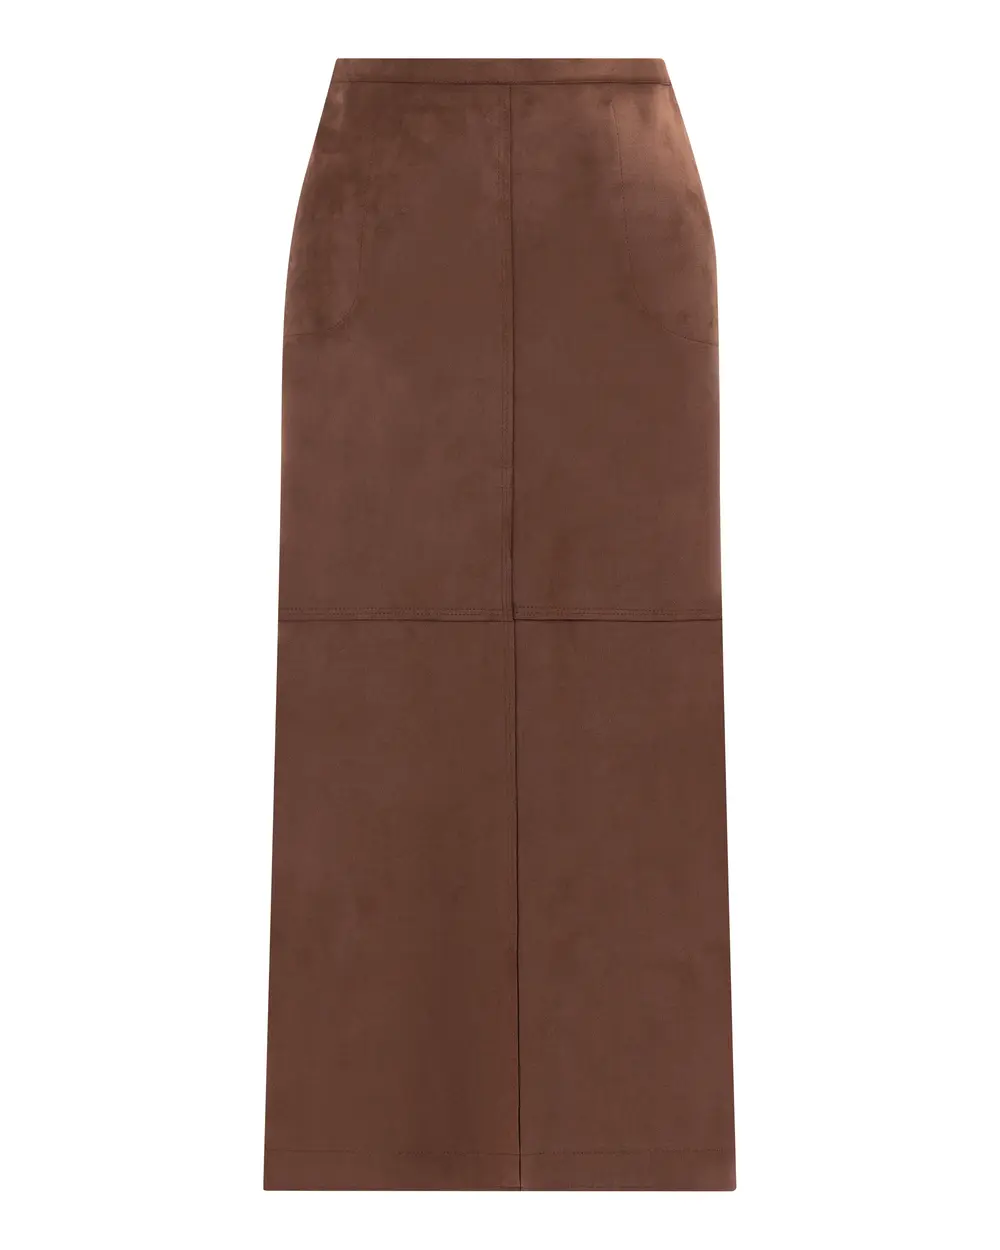 Plus Size A-Line Suede Skirt